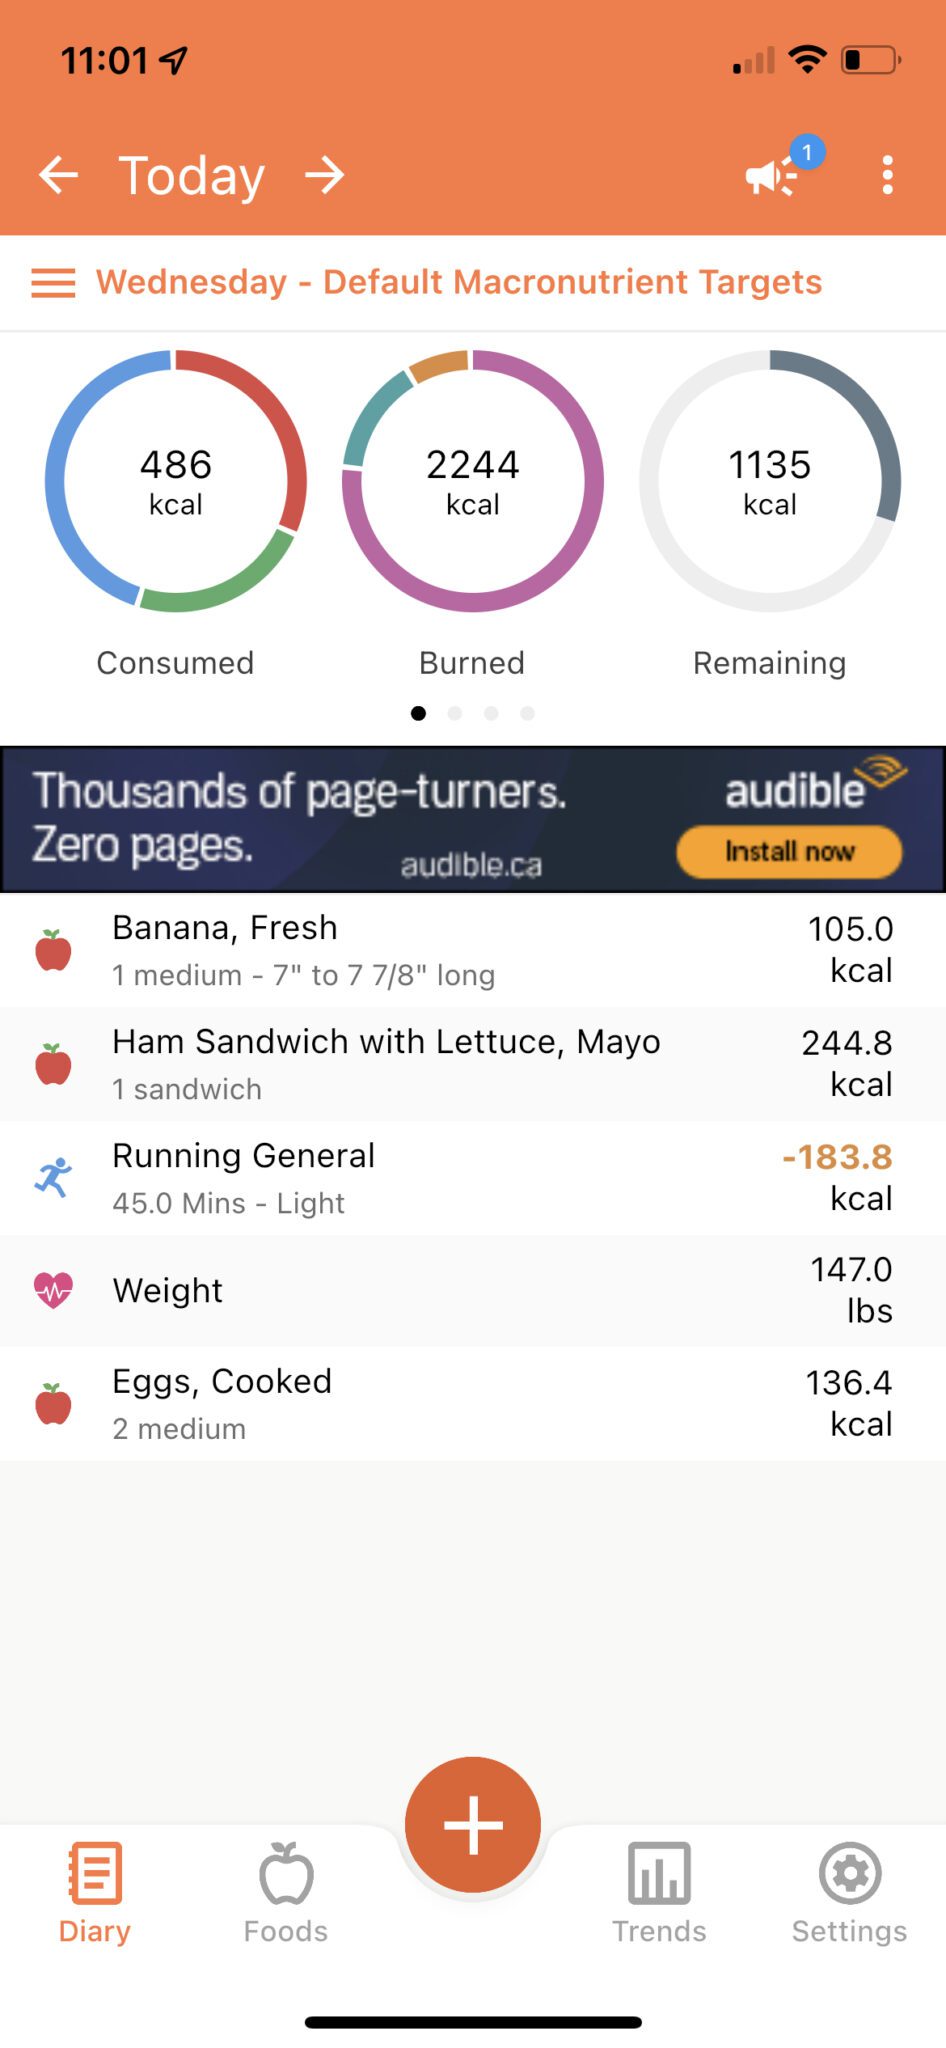 Track your daily food intake in your diary.